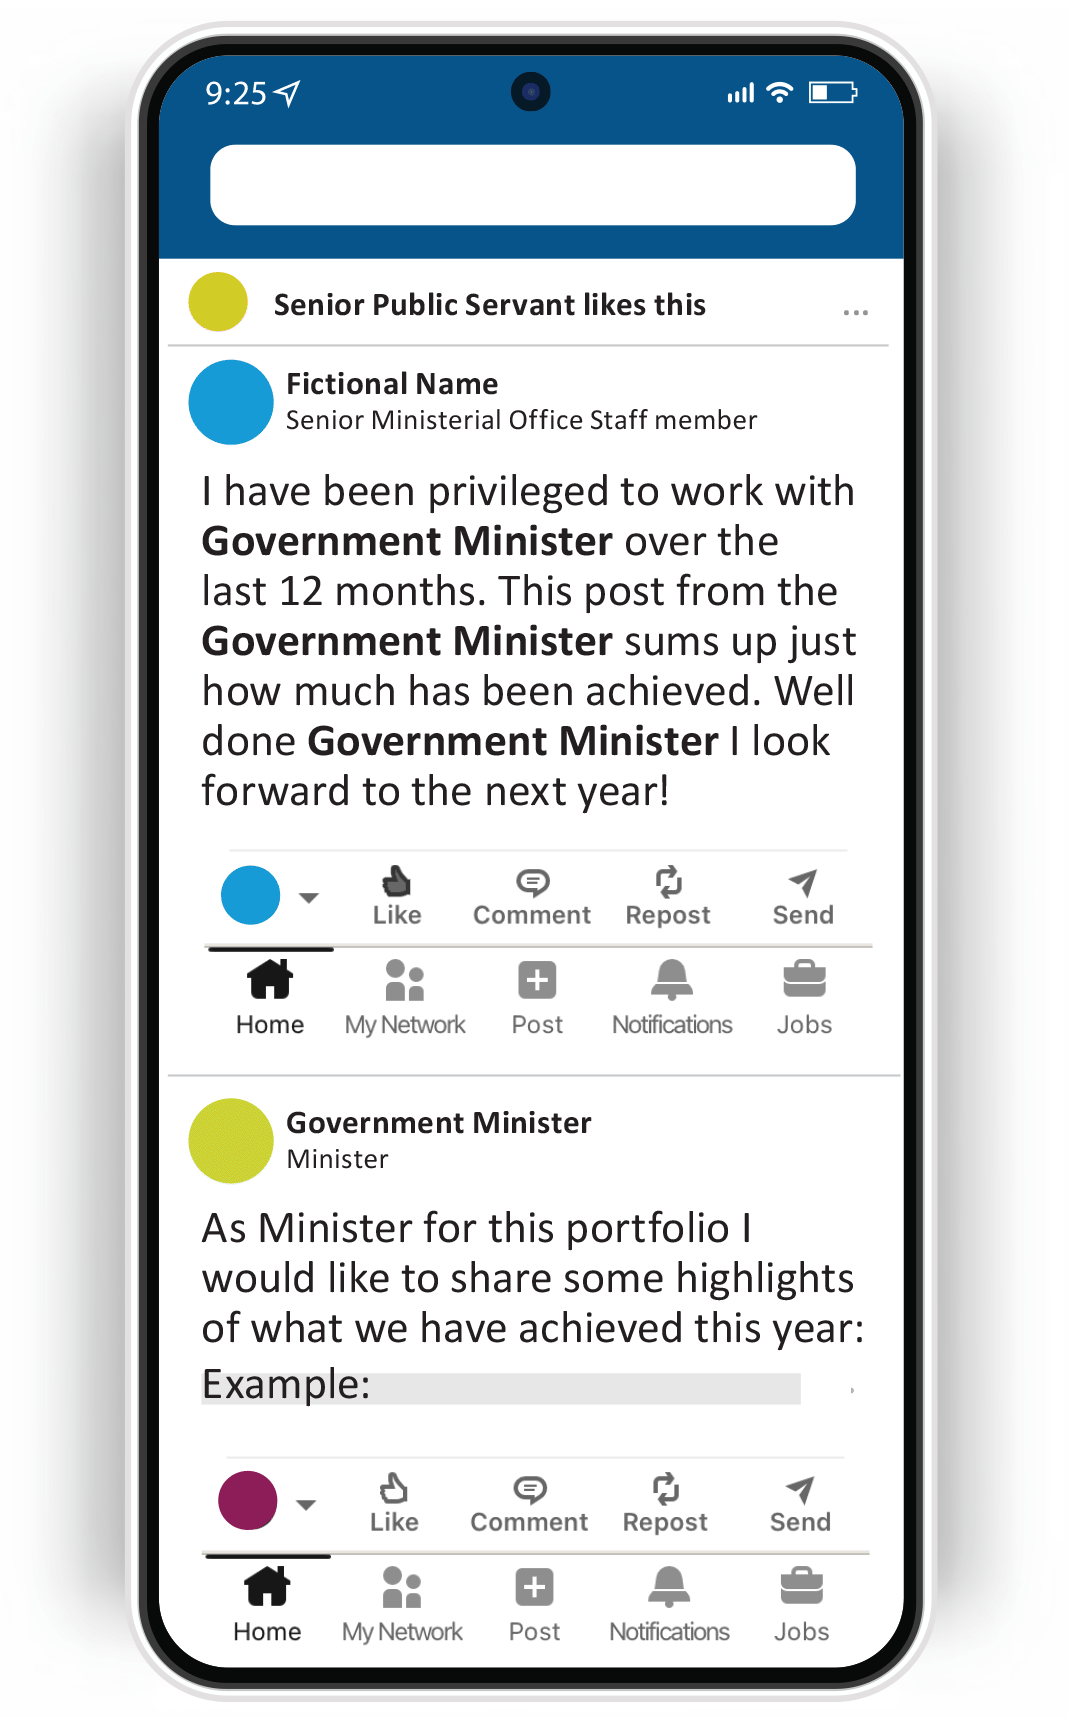 Iphone - I have been privileged to work with Government Minister over the last 12 months. This post from the Government Minister sums up just how much has been achived.